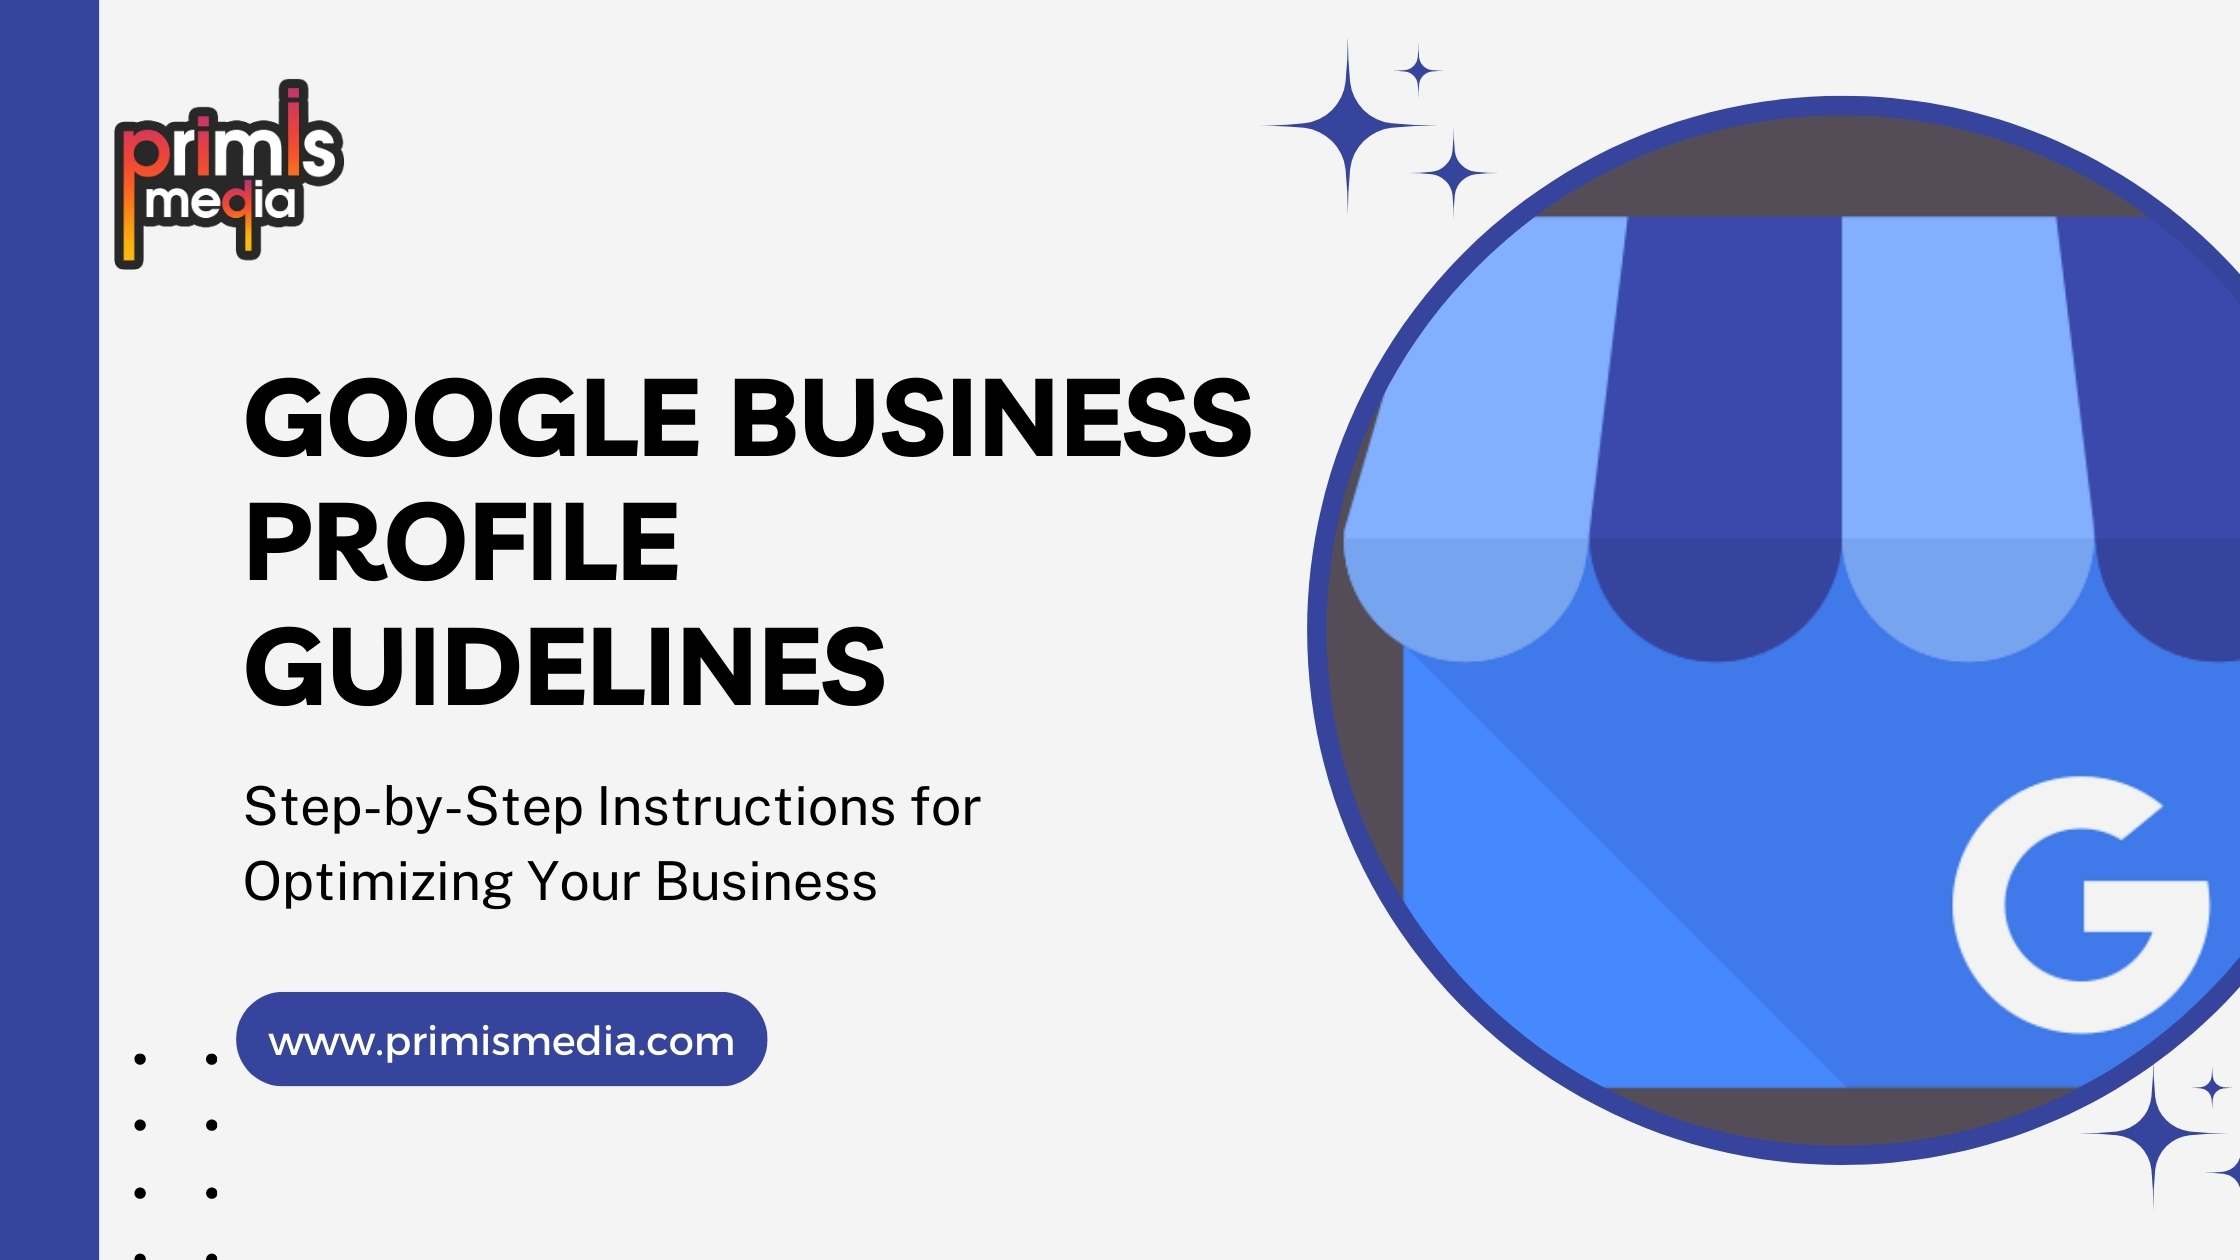 Google Business Profile Guidelines Demystified: Step-by-Step Instructions for Optimizing Your Business